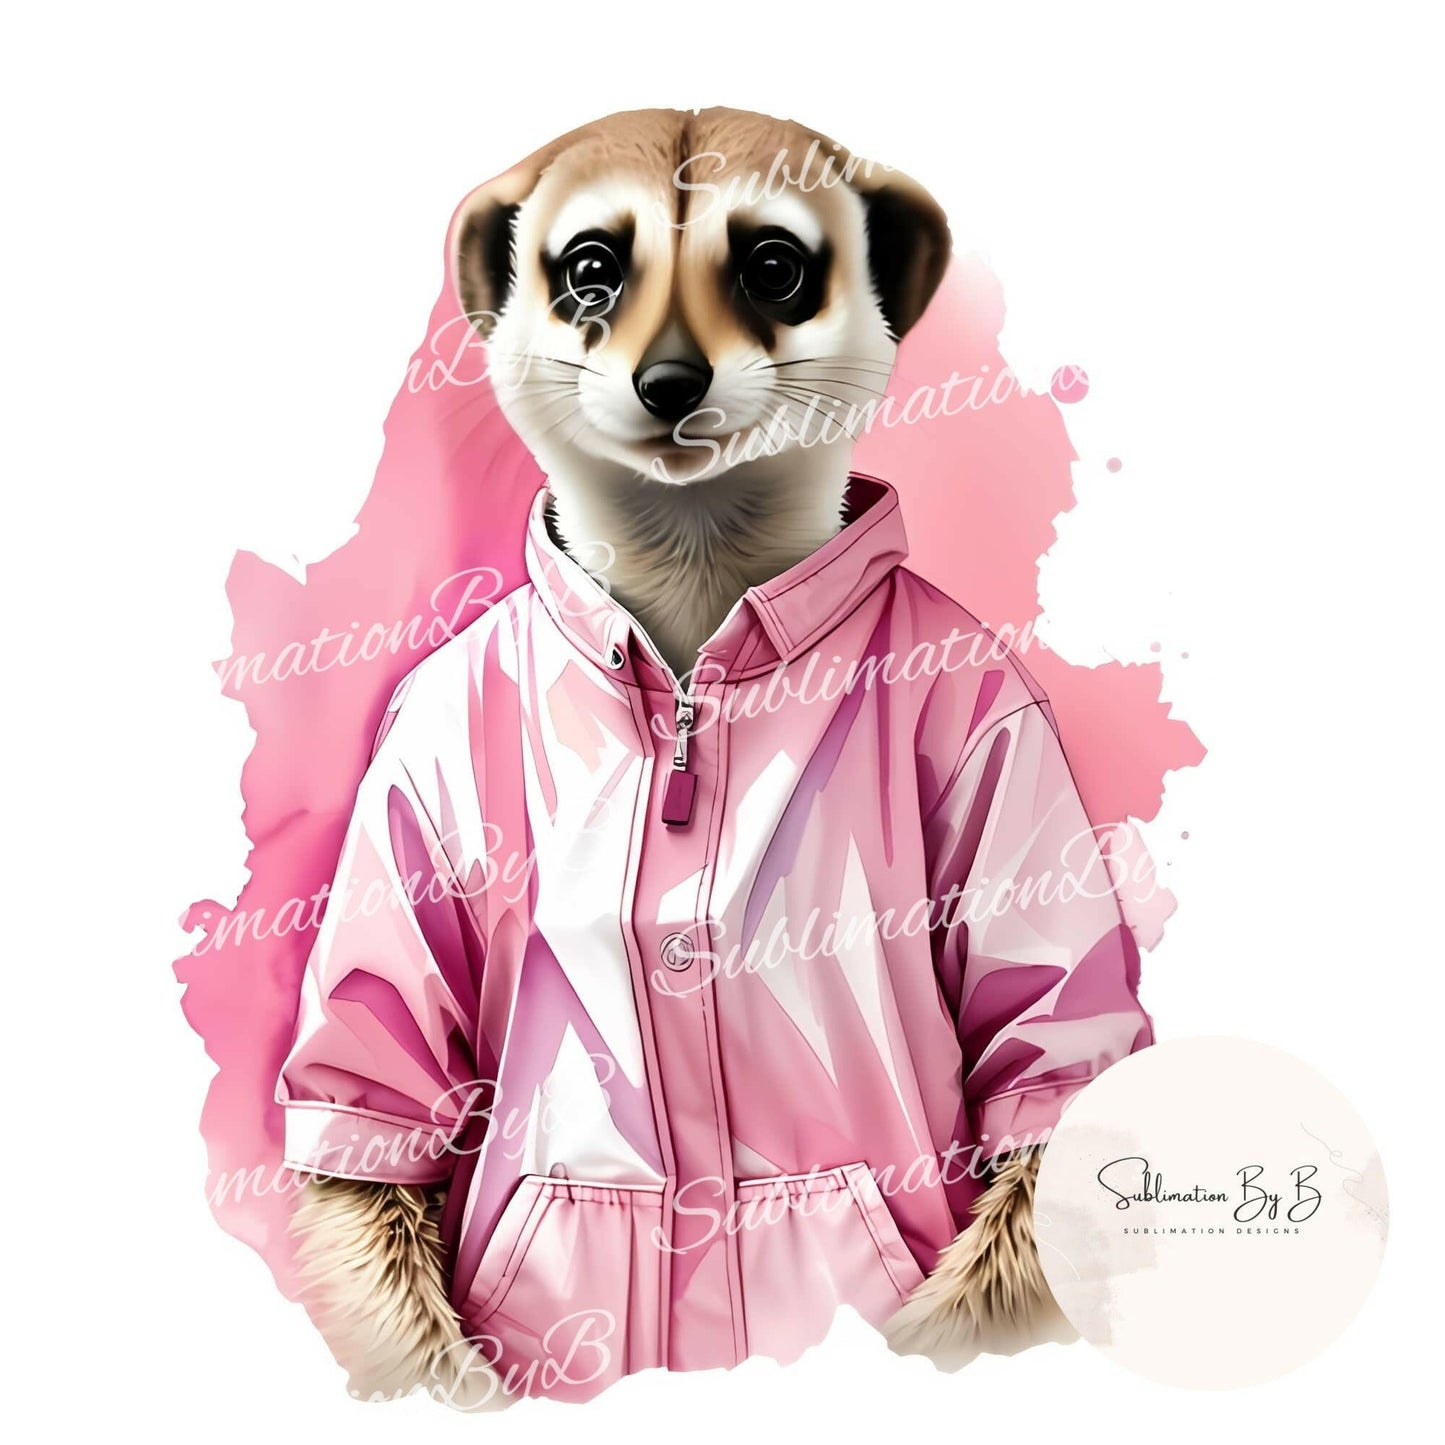 Charming Pink Meerkat Sublimation Design for a Whimsical Flair